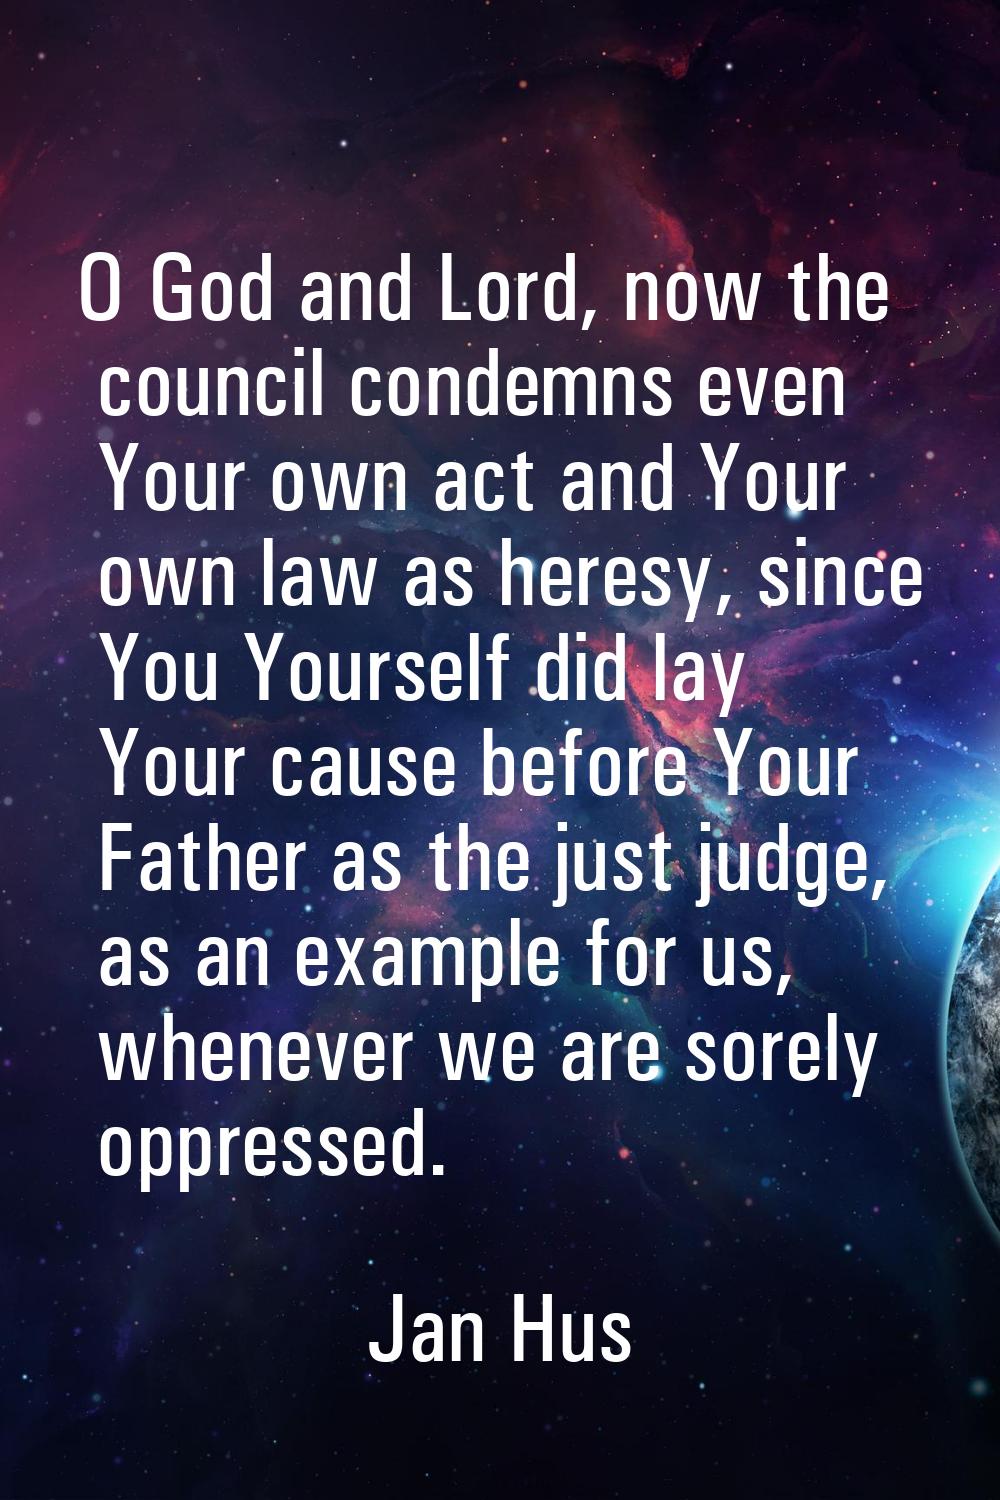 O God and Lord, now the council condemns even Your own act and Your own law as heresy, since You Yo